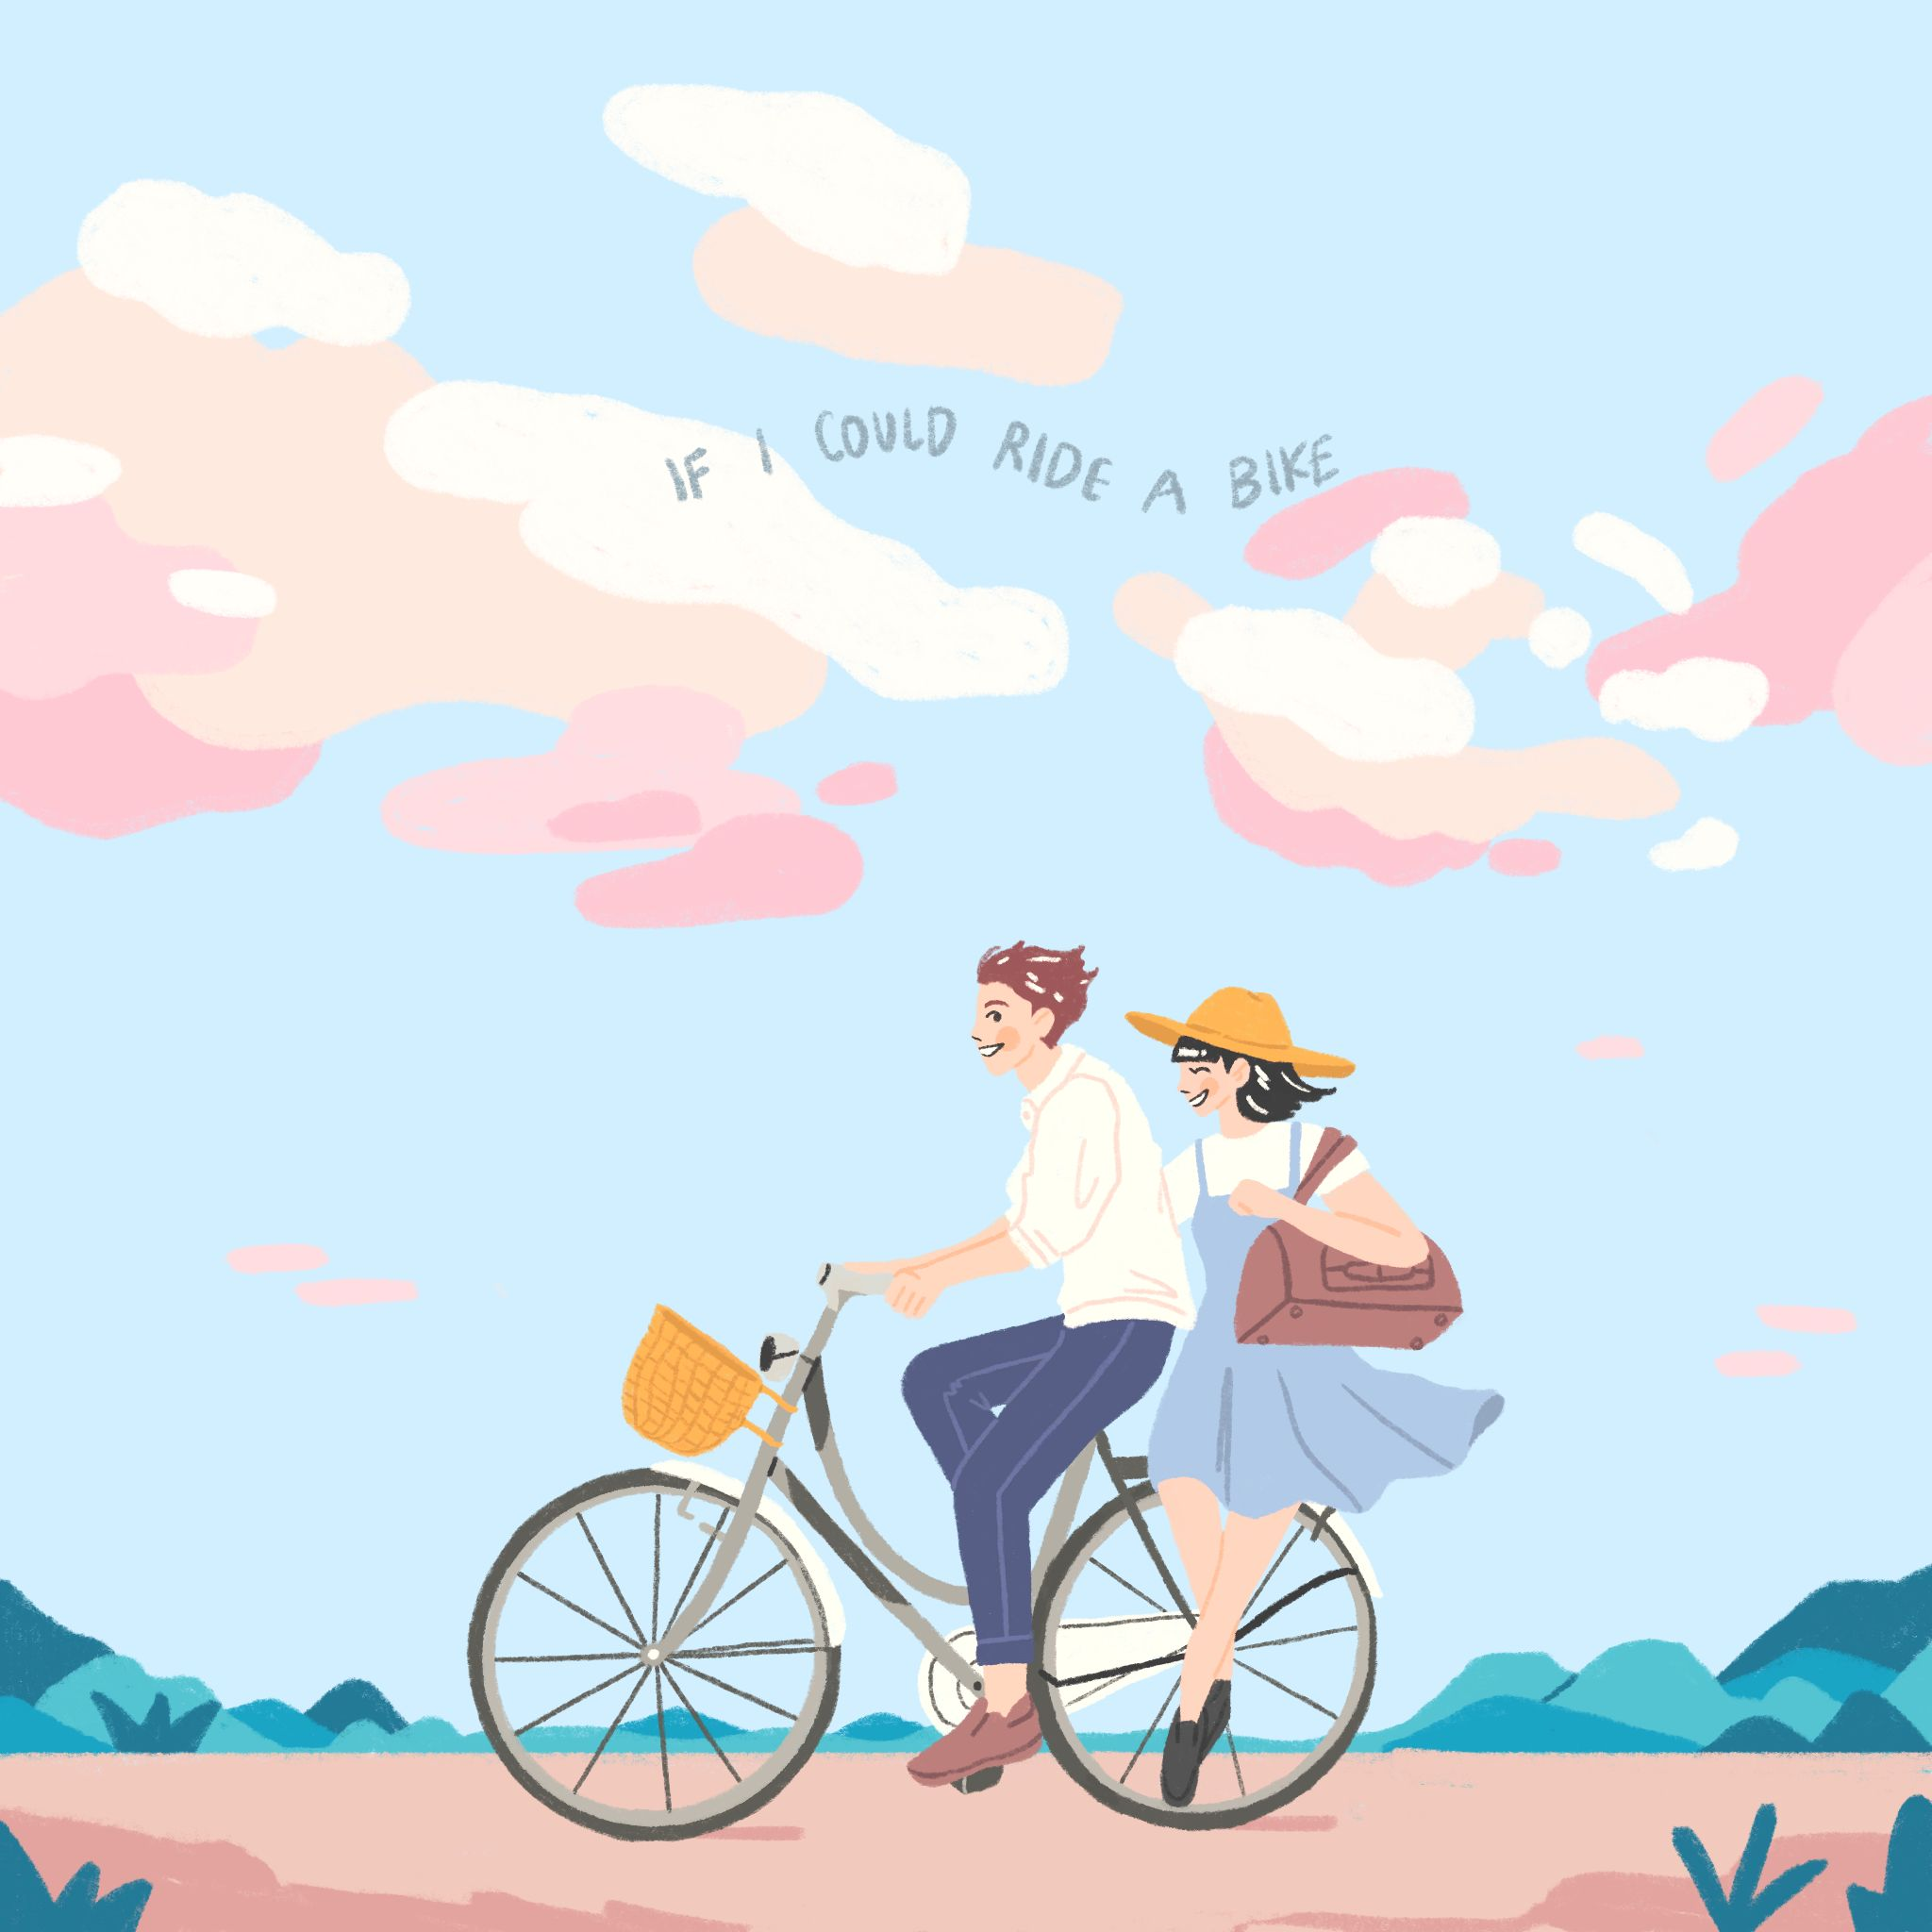 I can Ride a Bike картинка для детей. Luca and Alberto can Ride a Bike. You can Ride a Bike in the Park. I like to Ride a Bike. Can you ride me